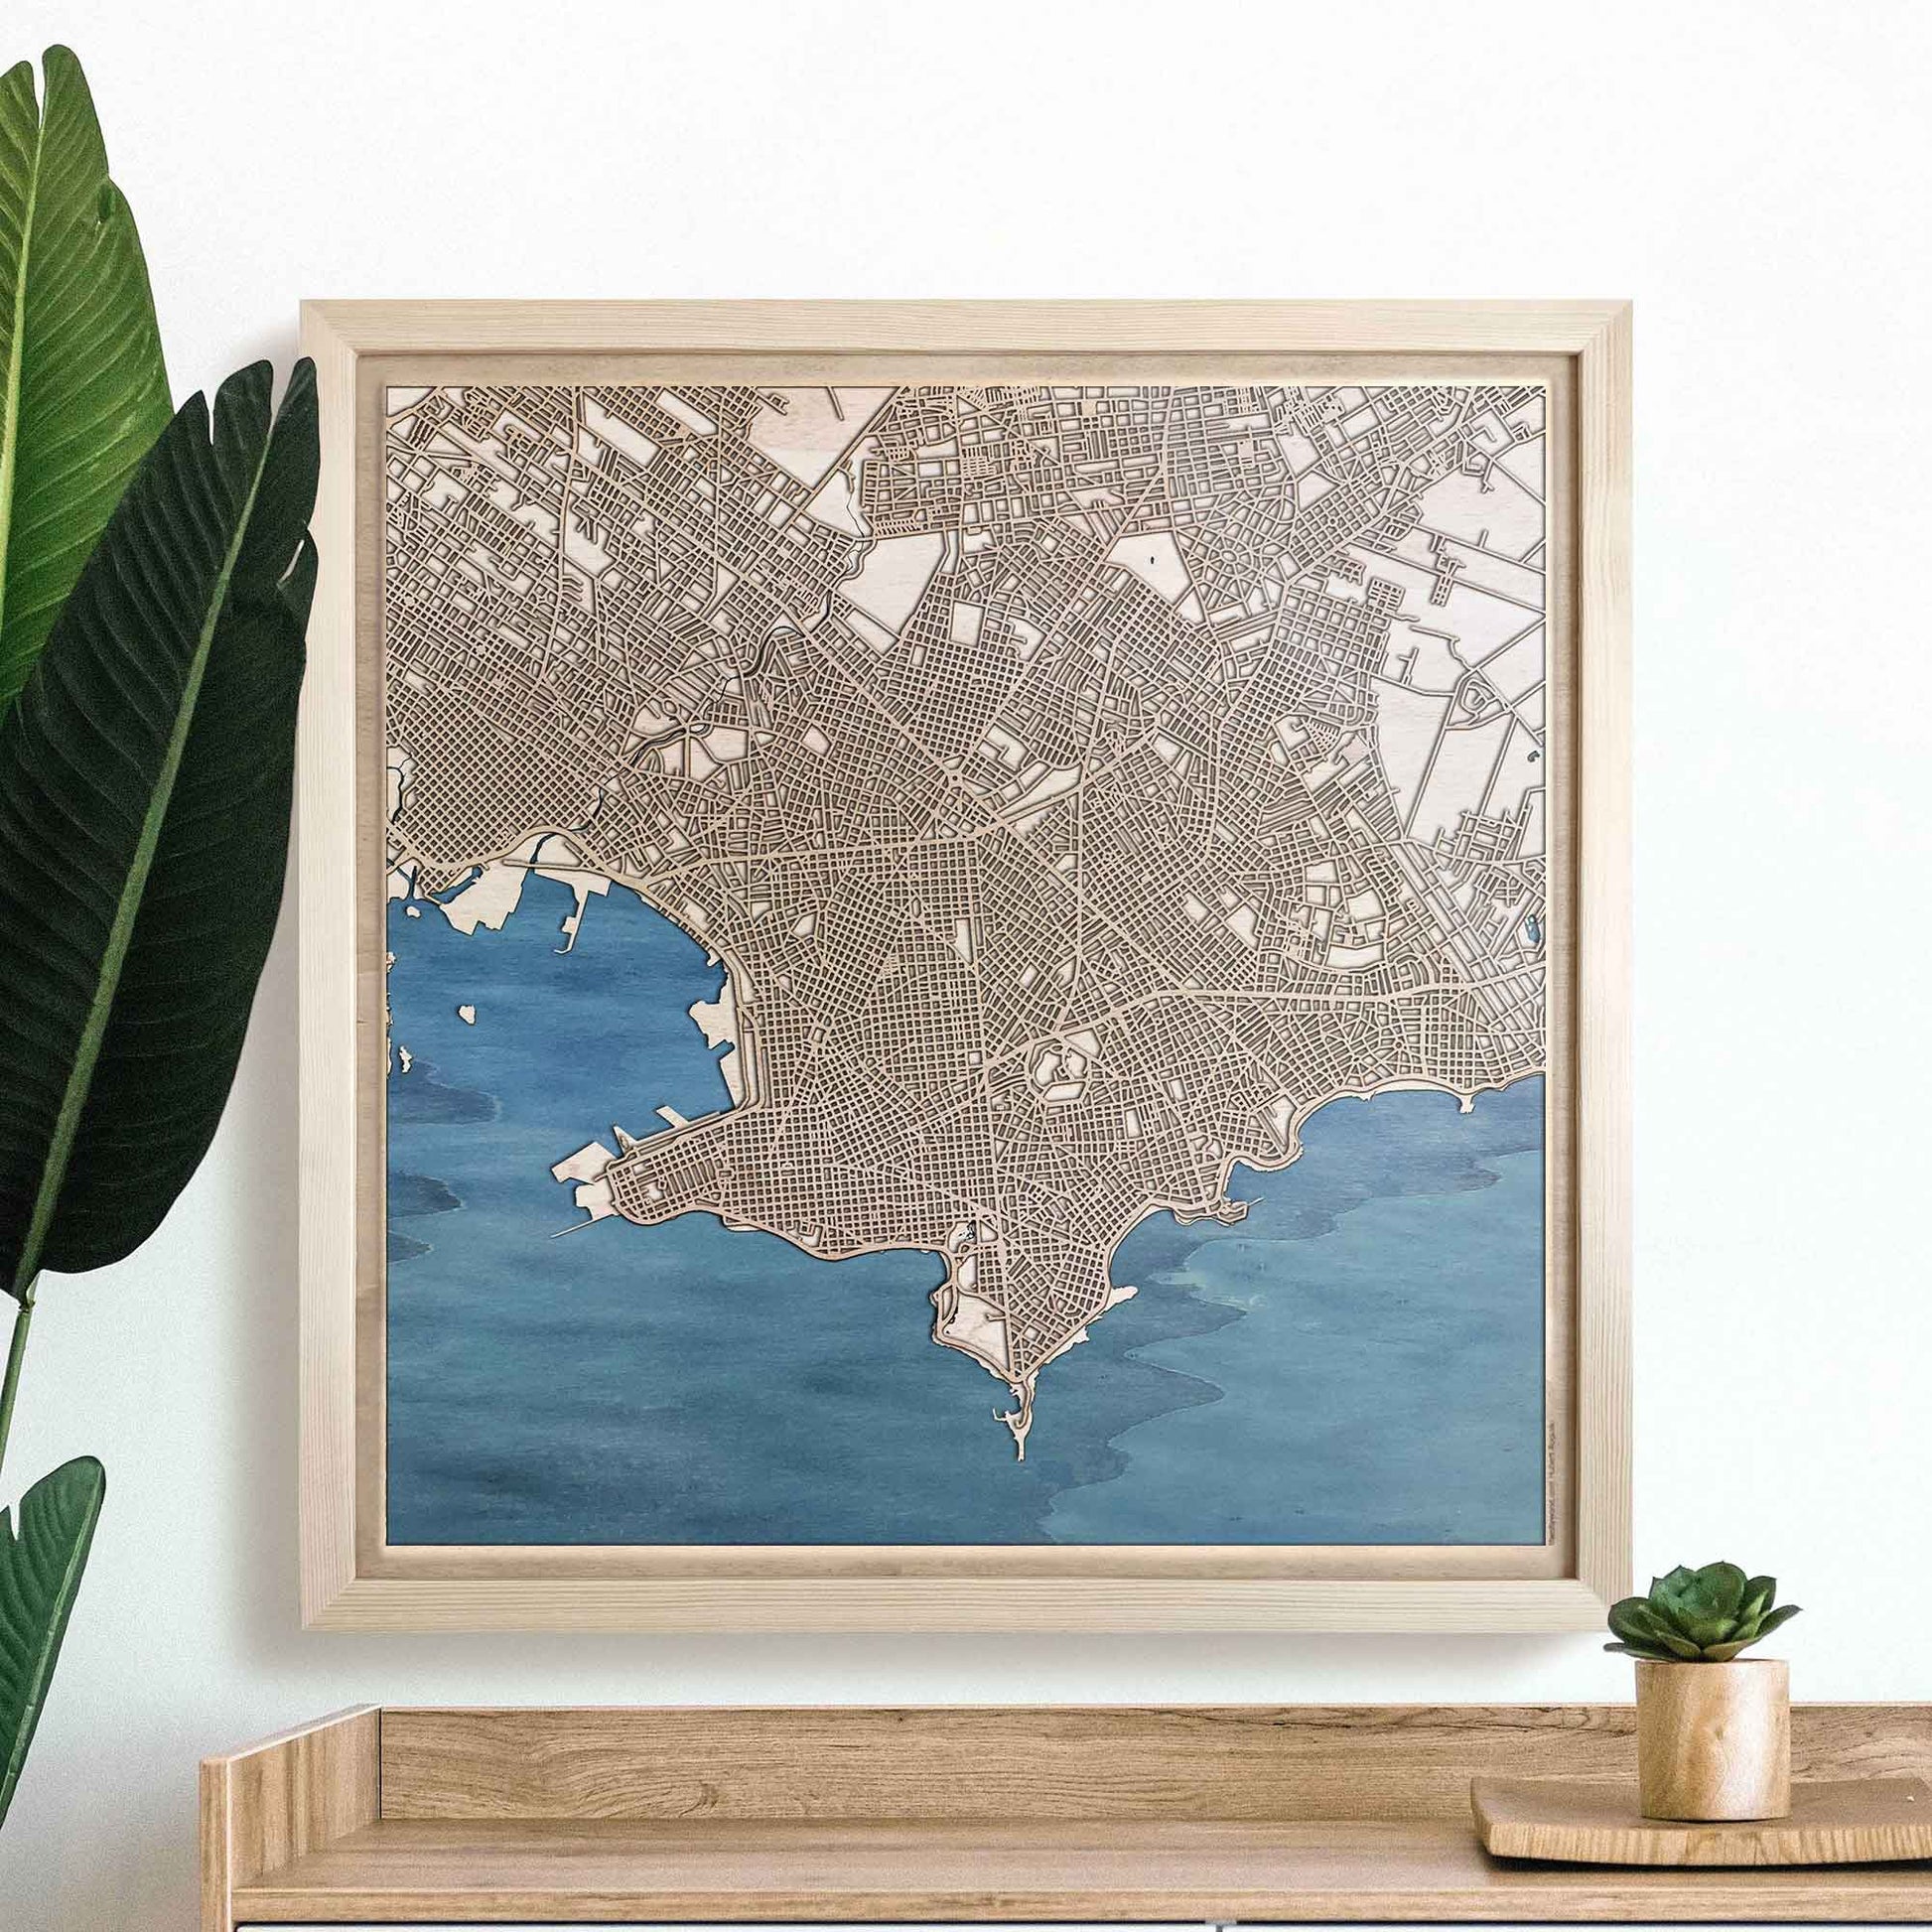 Montevideo Wooden Map by CityWood - Custom Wood Map Art - Unique Laser Cut Engraved - Anniversary Gift